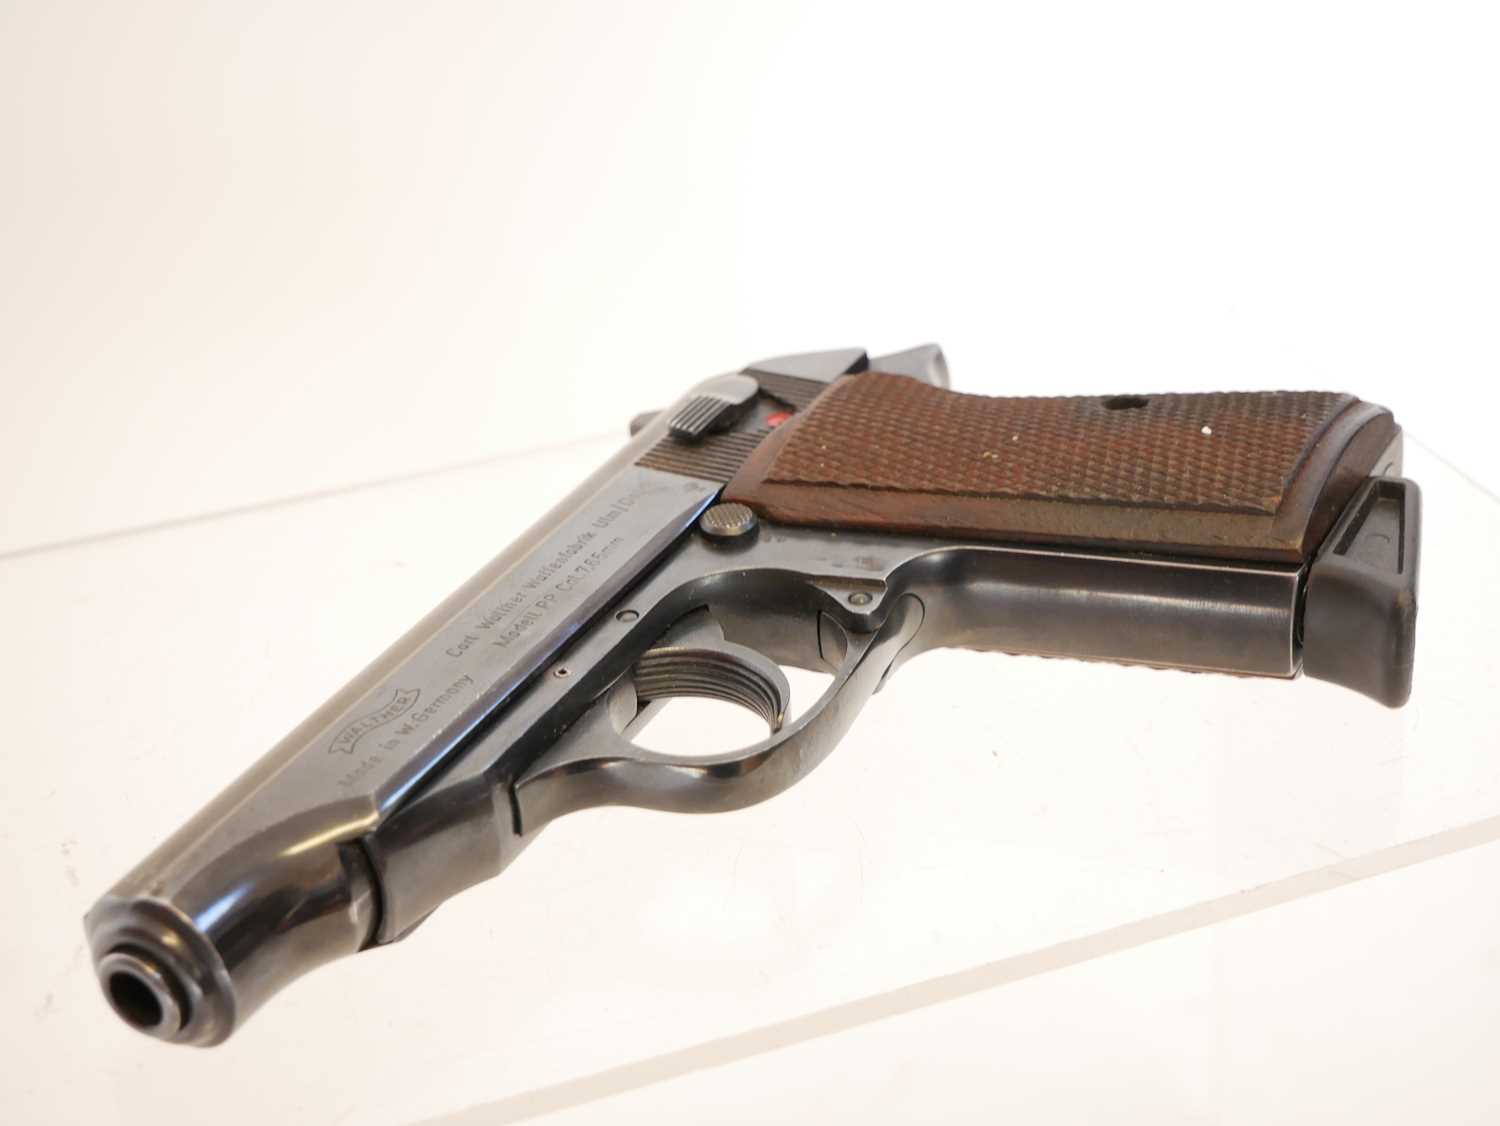 Deactivated Walther PP 7.65mm semi automatic pistol, serial number 398802, with one magazine. - Image 6 of 6